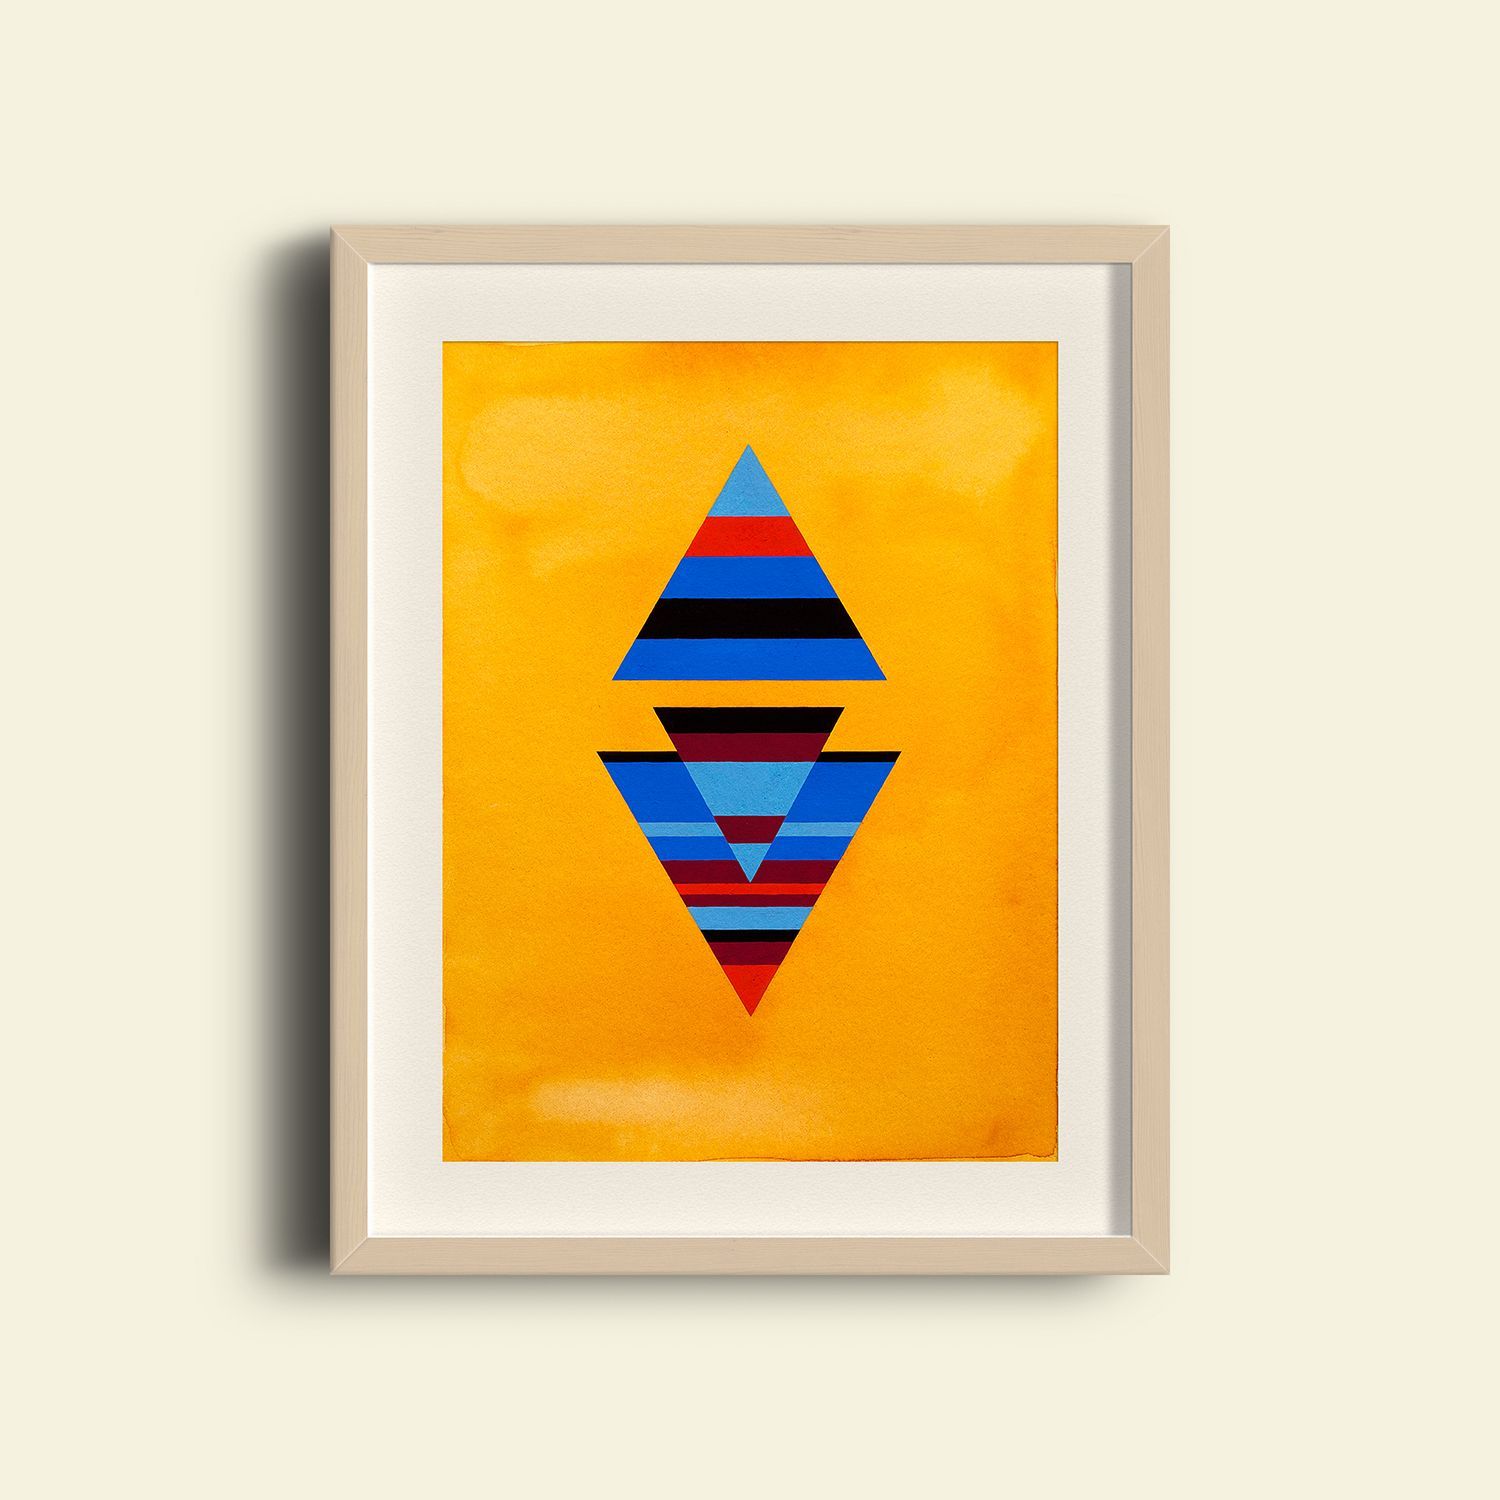 Pyramid Reflections Ii | Original Painting Design, Framed Within Pyrimids Wall Art (View 13 of 15)